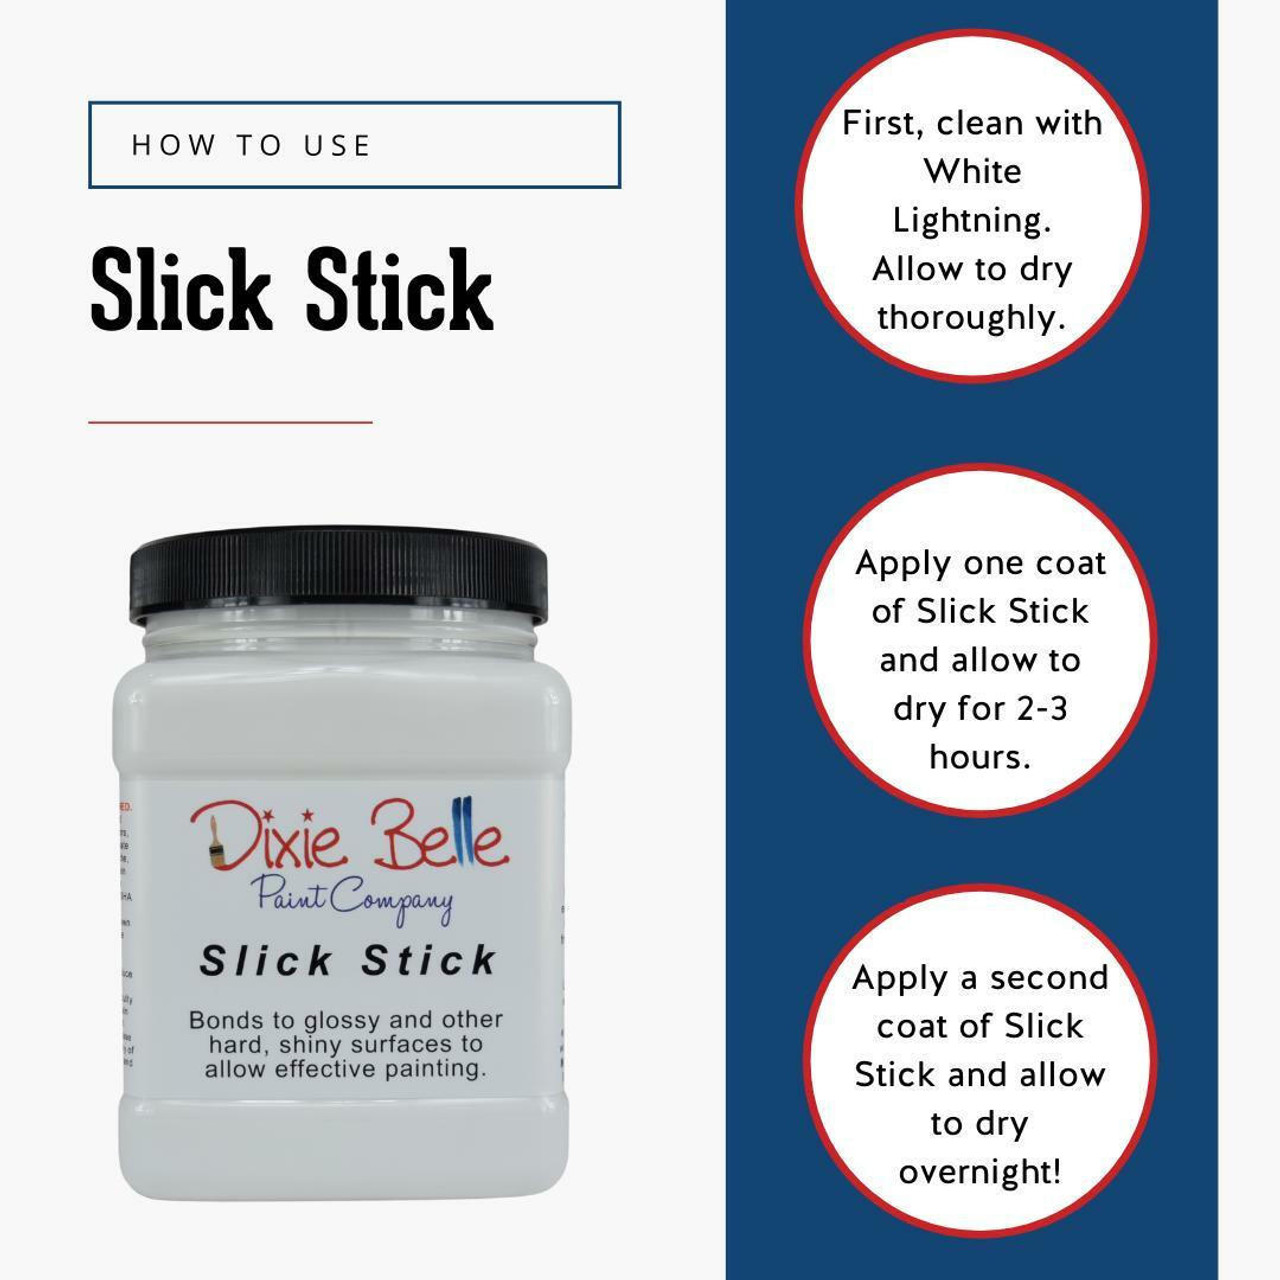 Prepping for paint with @dixiebellepaint Slick Stick